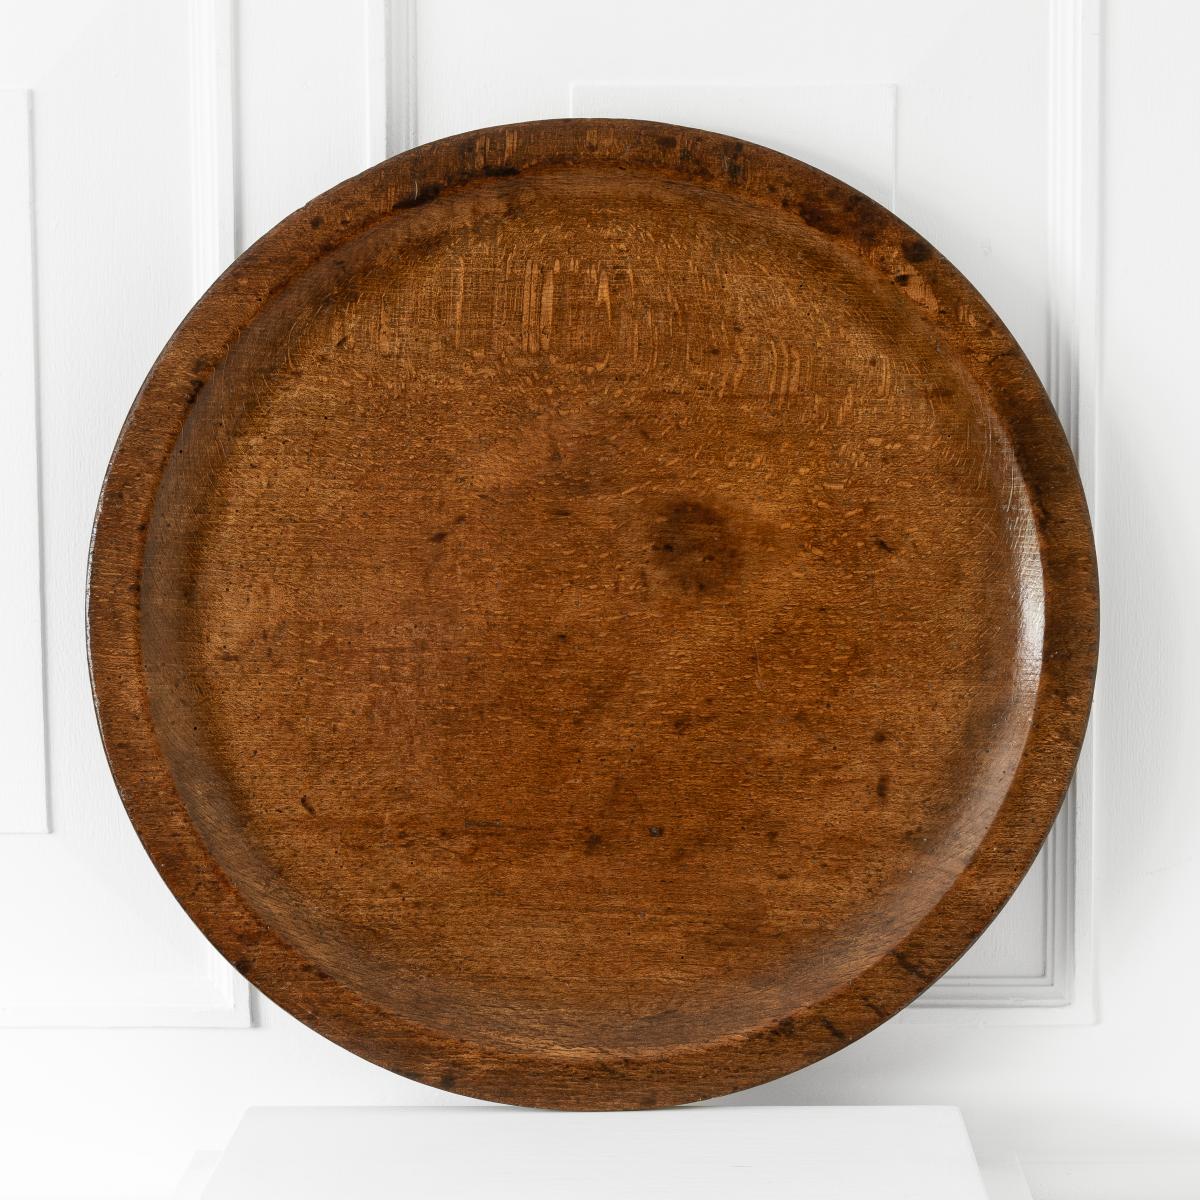 A good beech platter of exceptional large size, English, circa 1750-1800